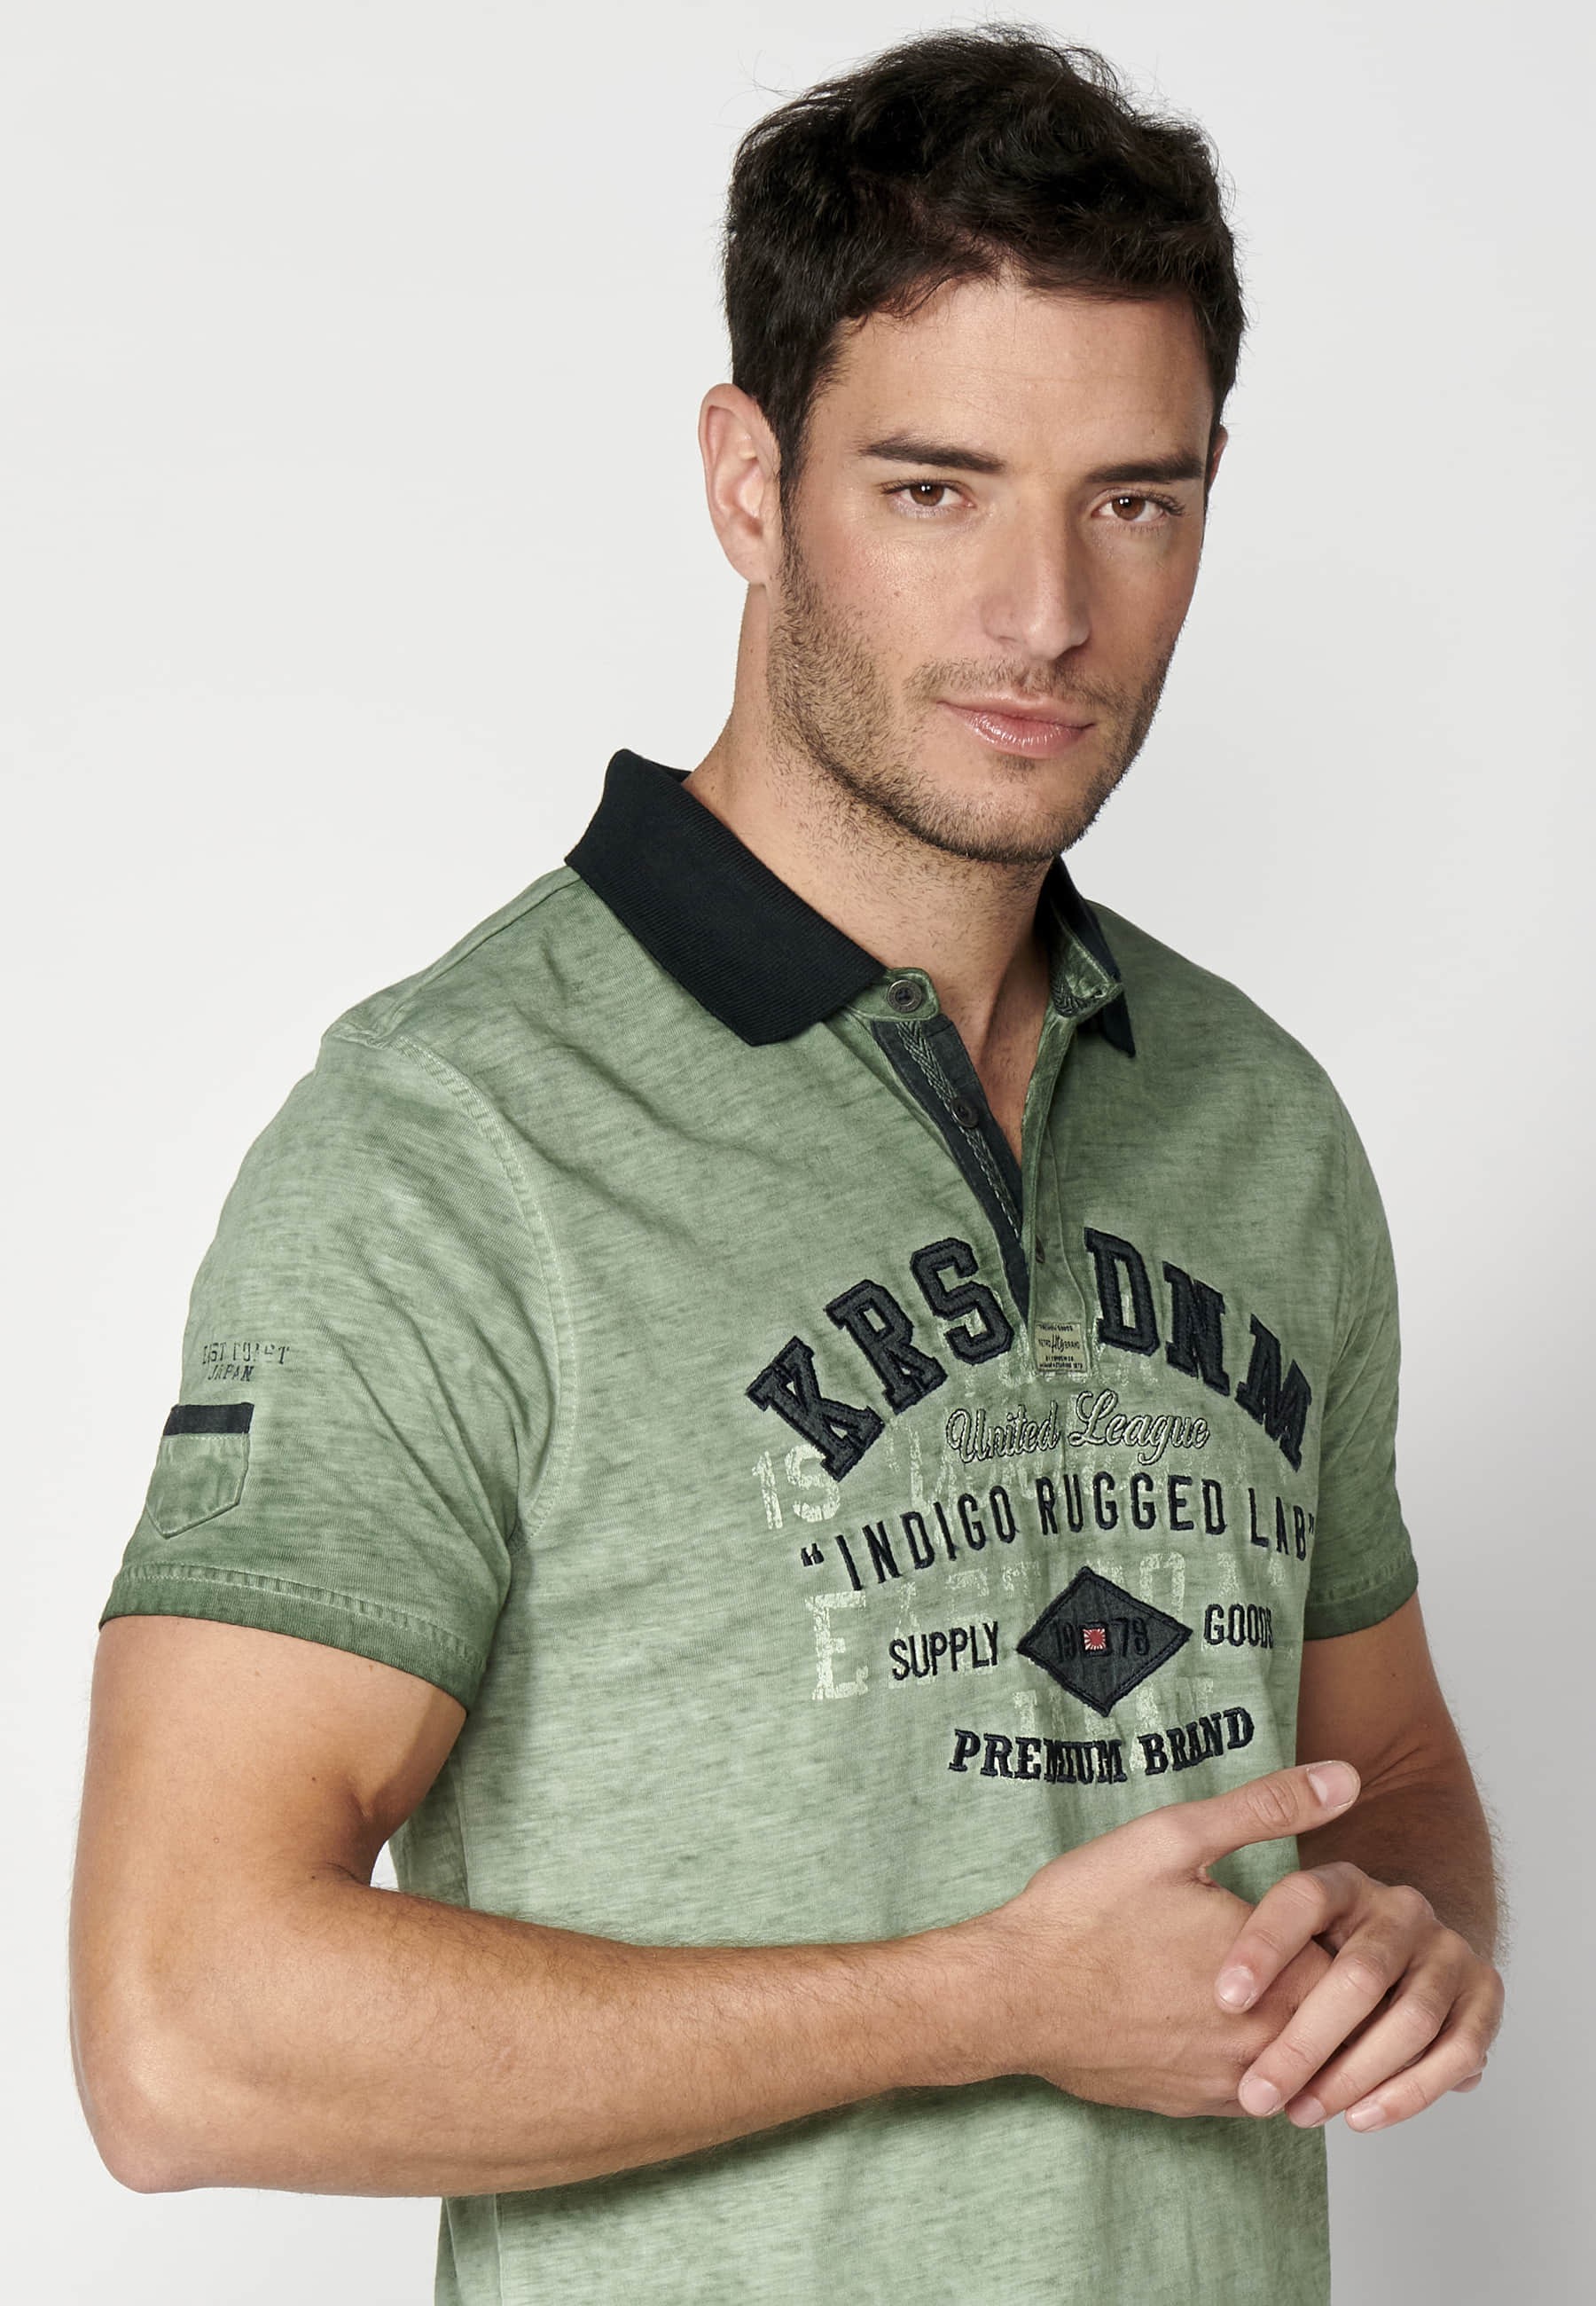 Khaki short-sleeved Cotton polo shirt with text print for Men